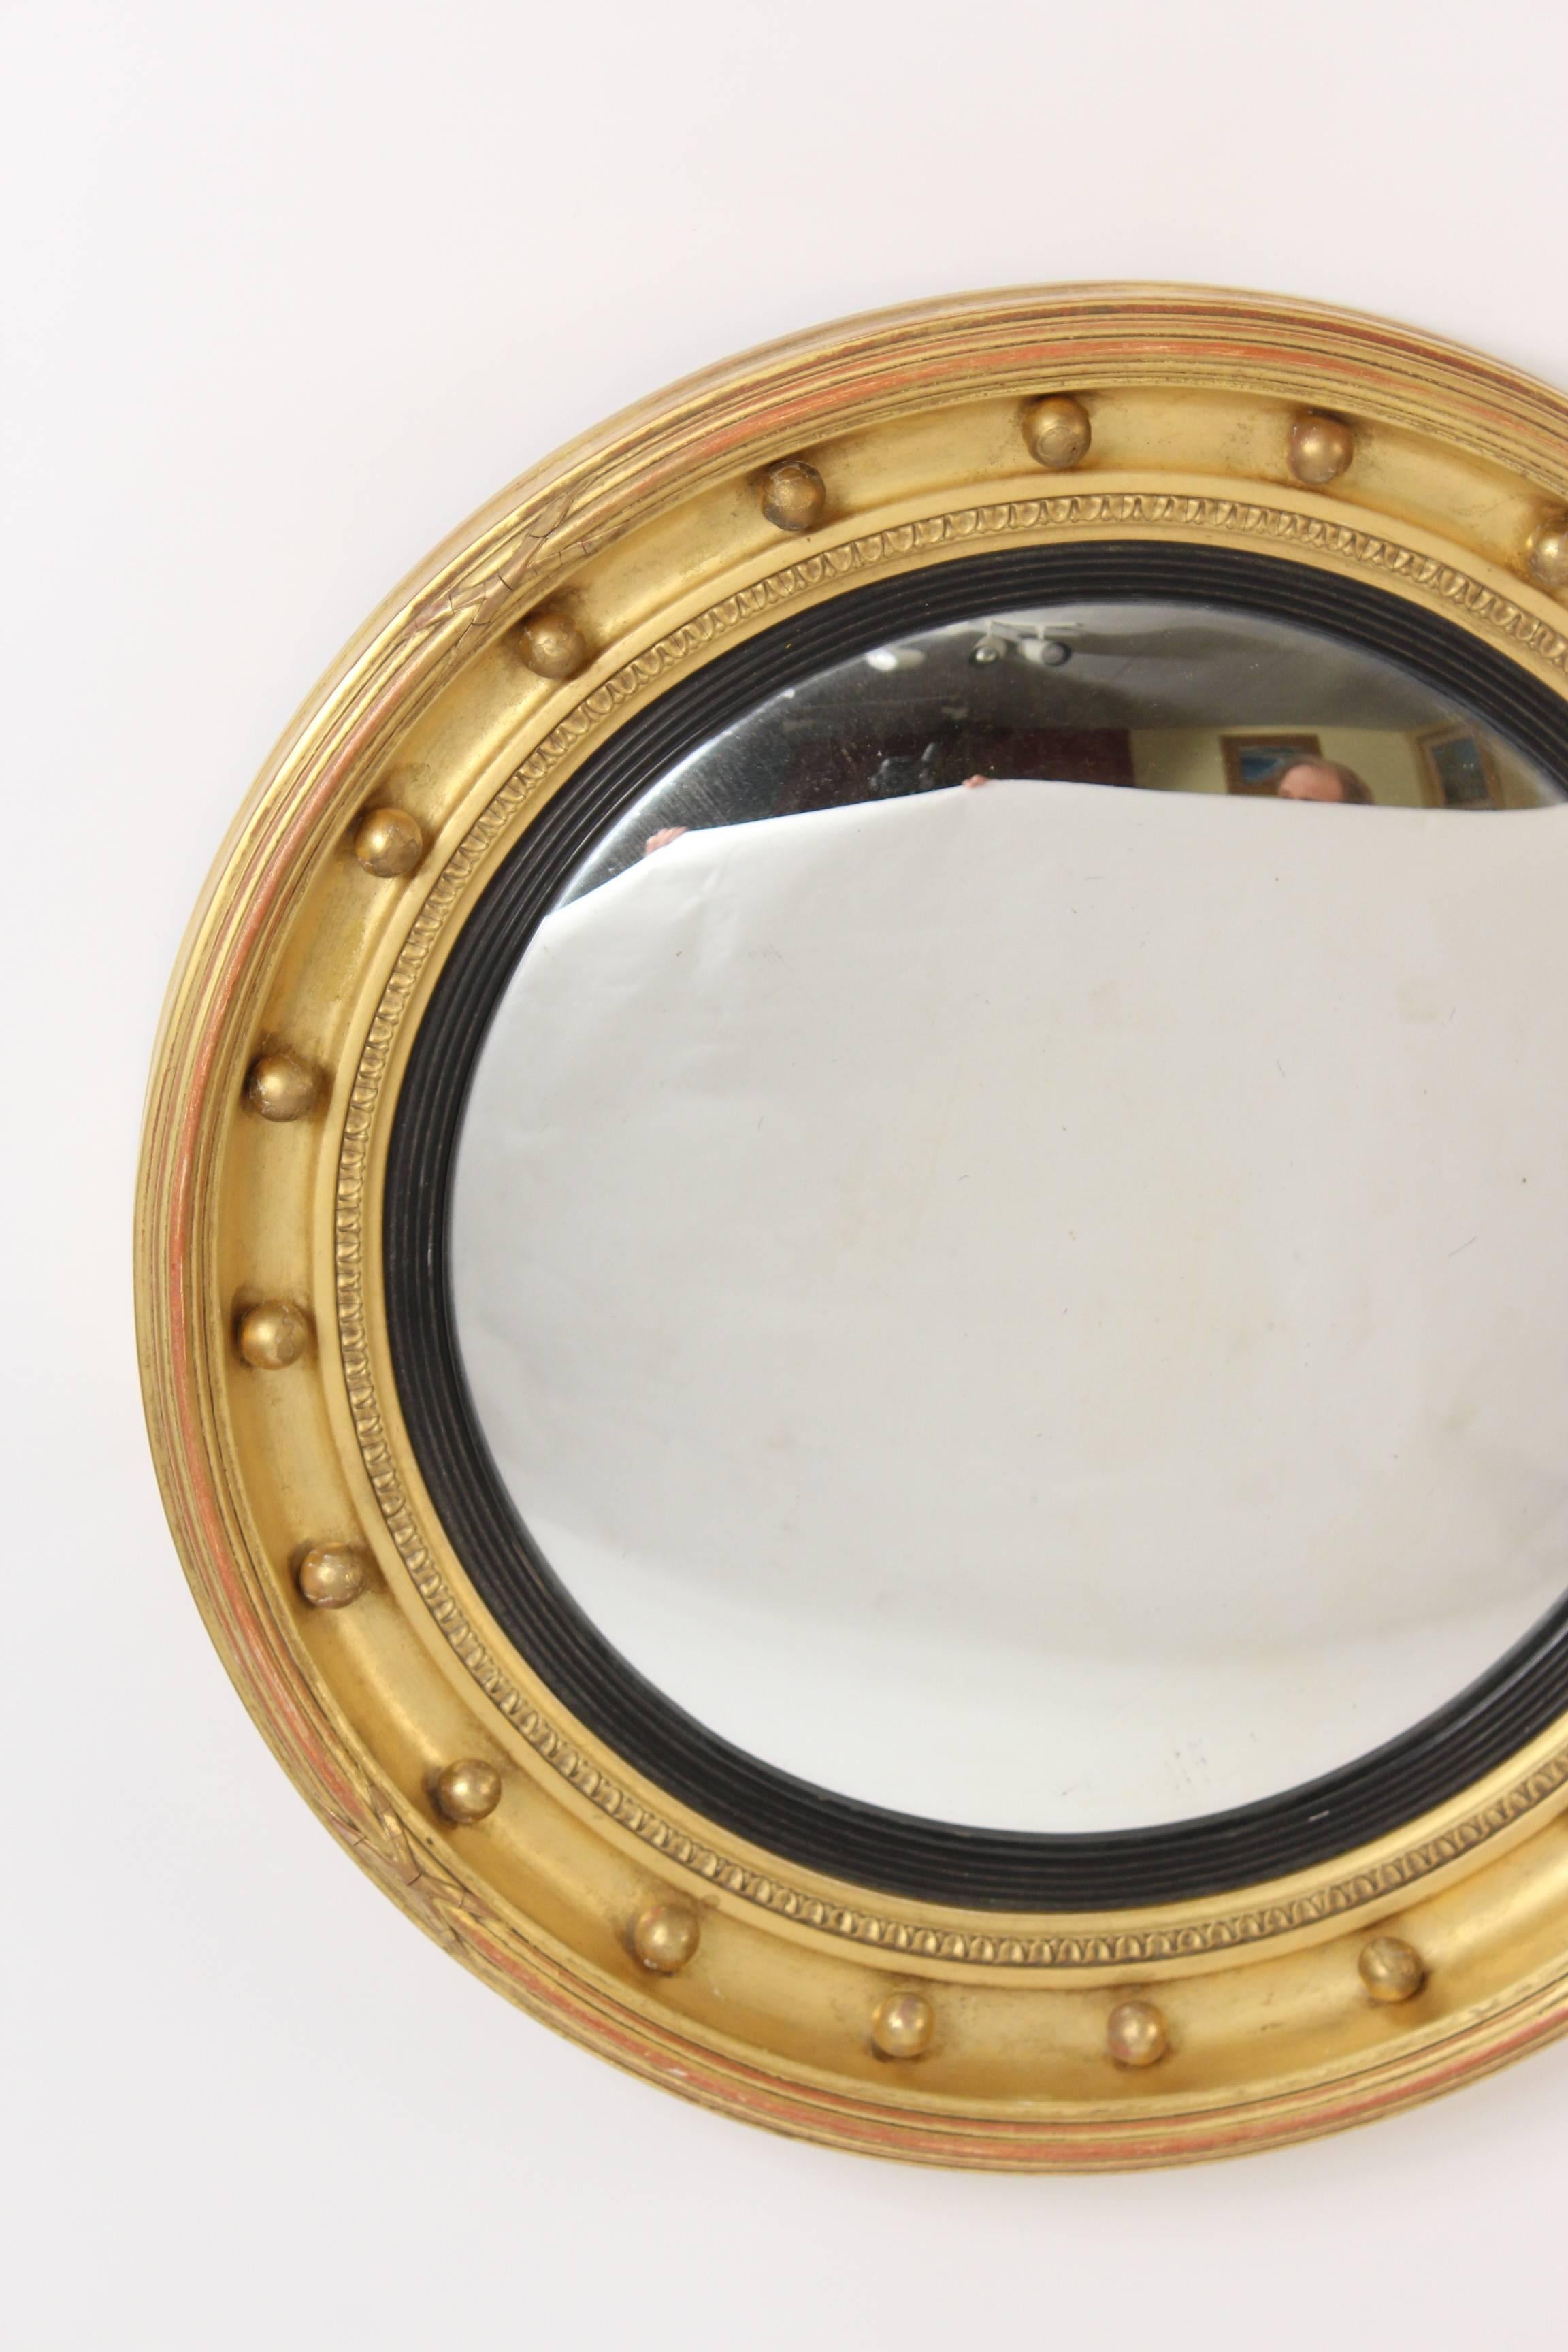 George III style giltwood bulls eye mirror with convex glass, circa 1900. The depth of the mirror is 3